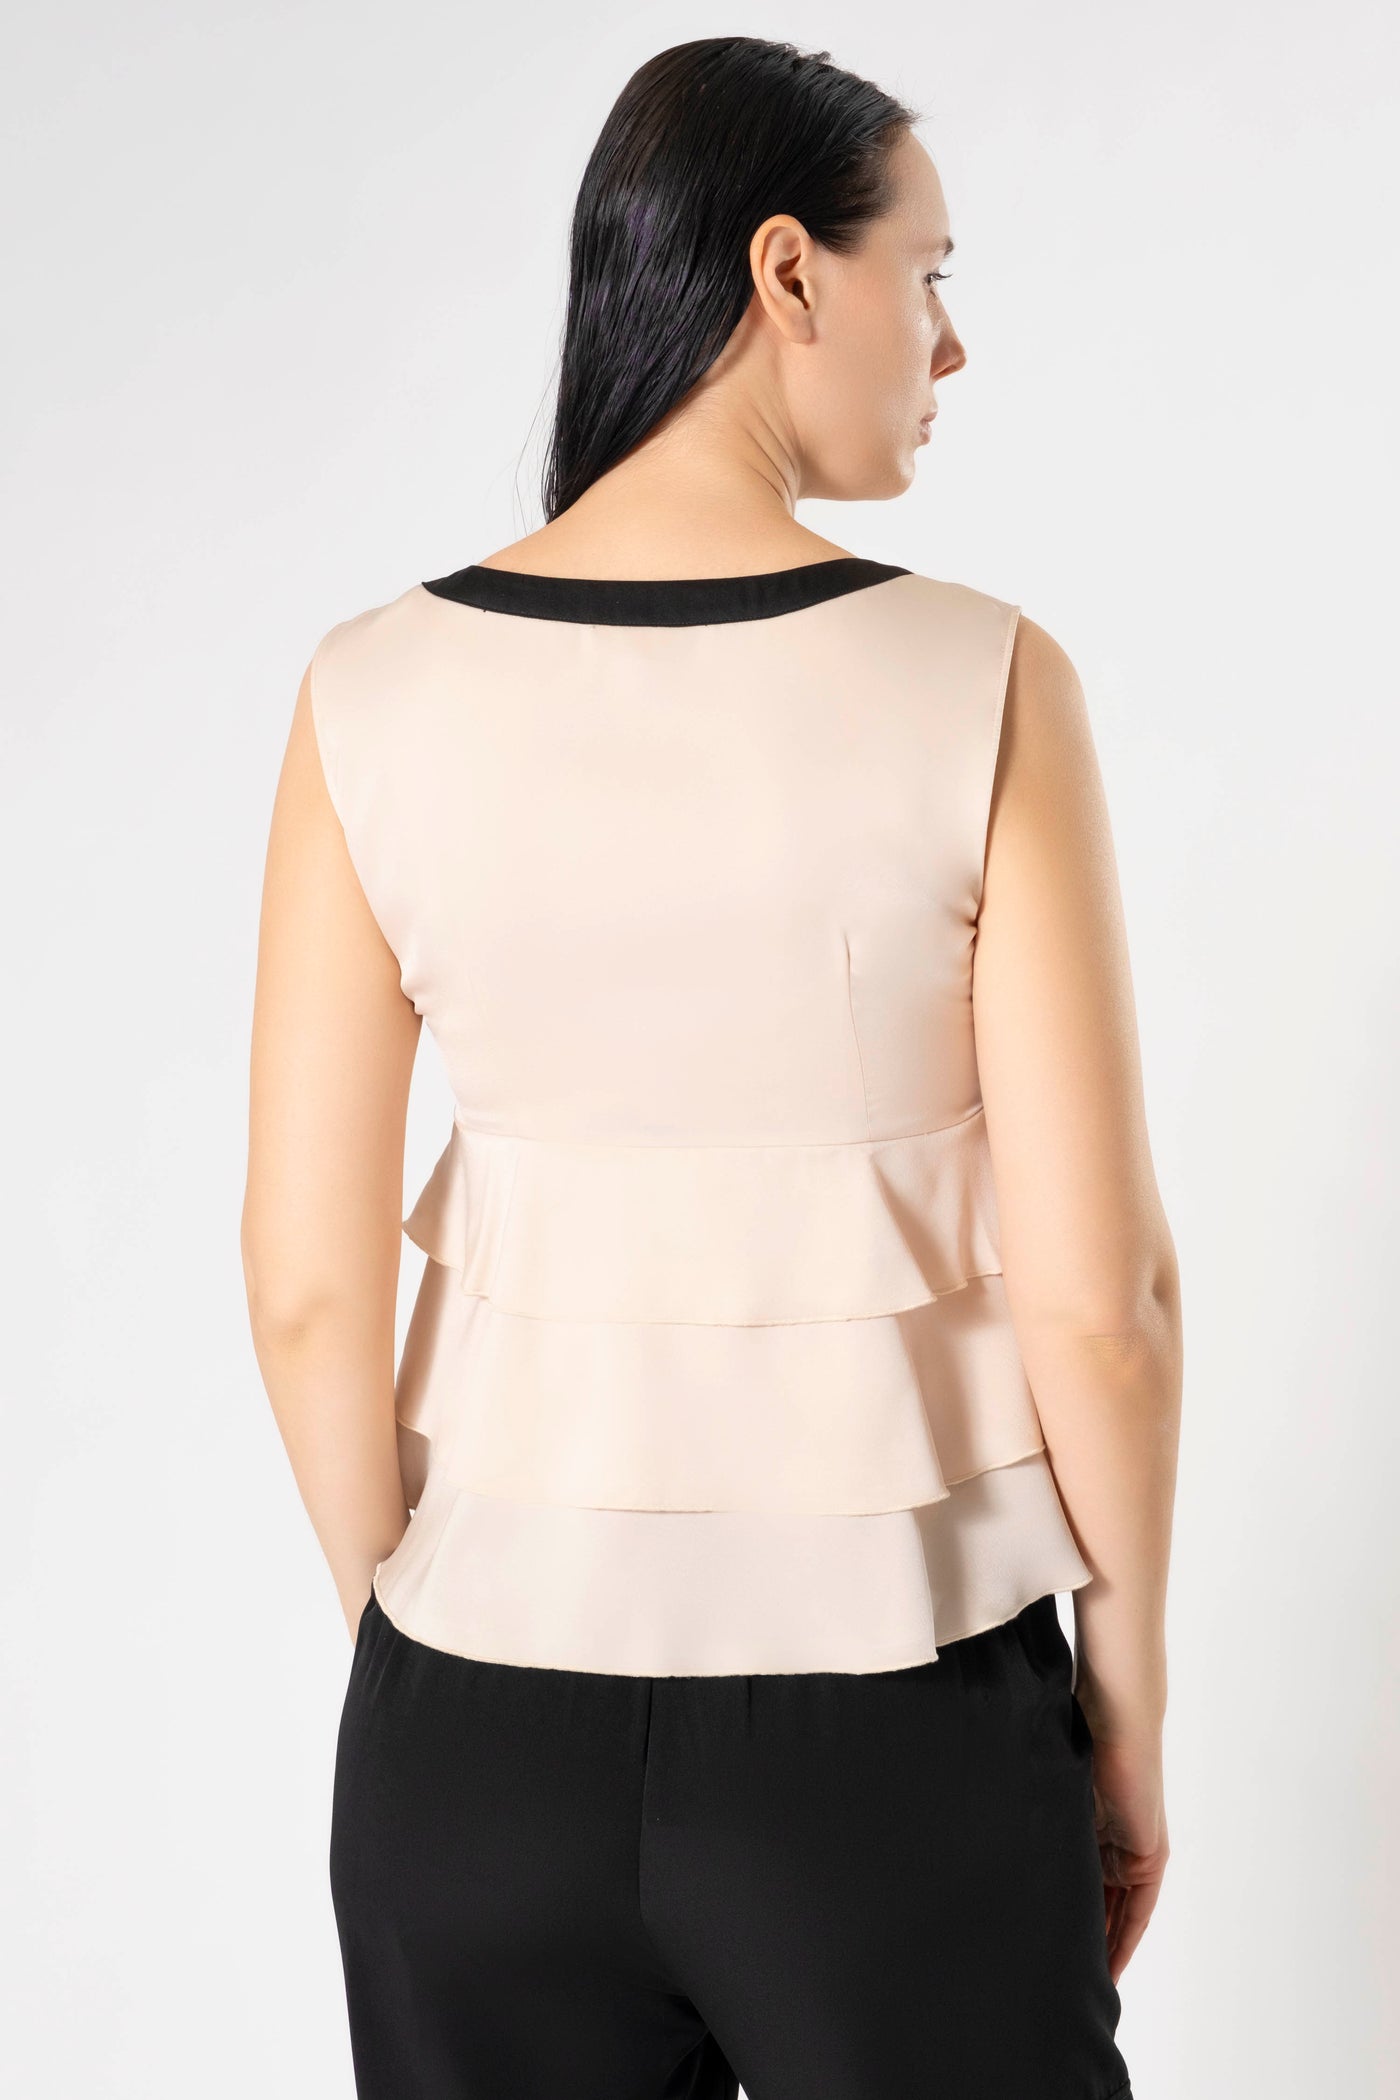 Serena Bow & Tiered Ruffles Novelty Button Blouse